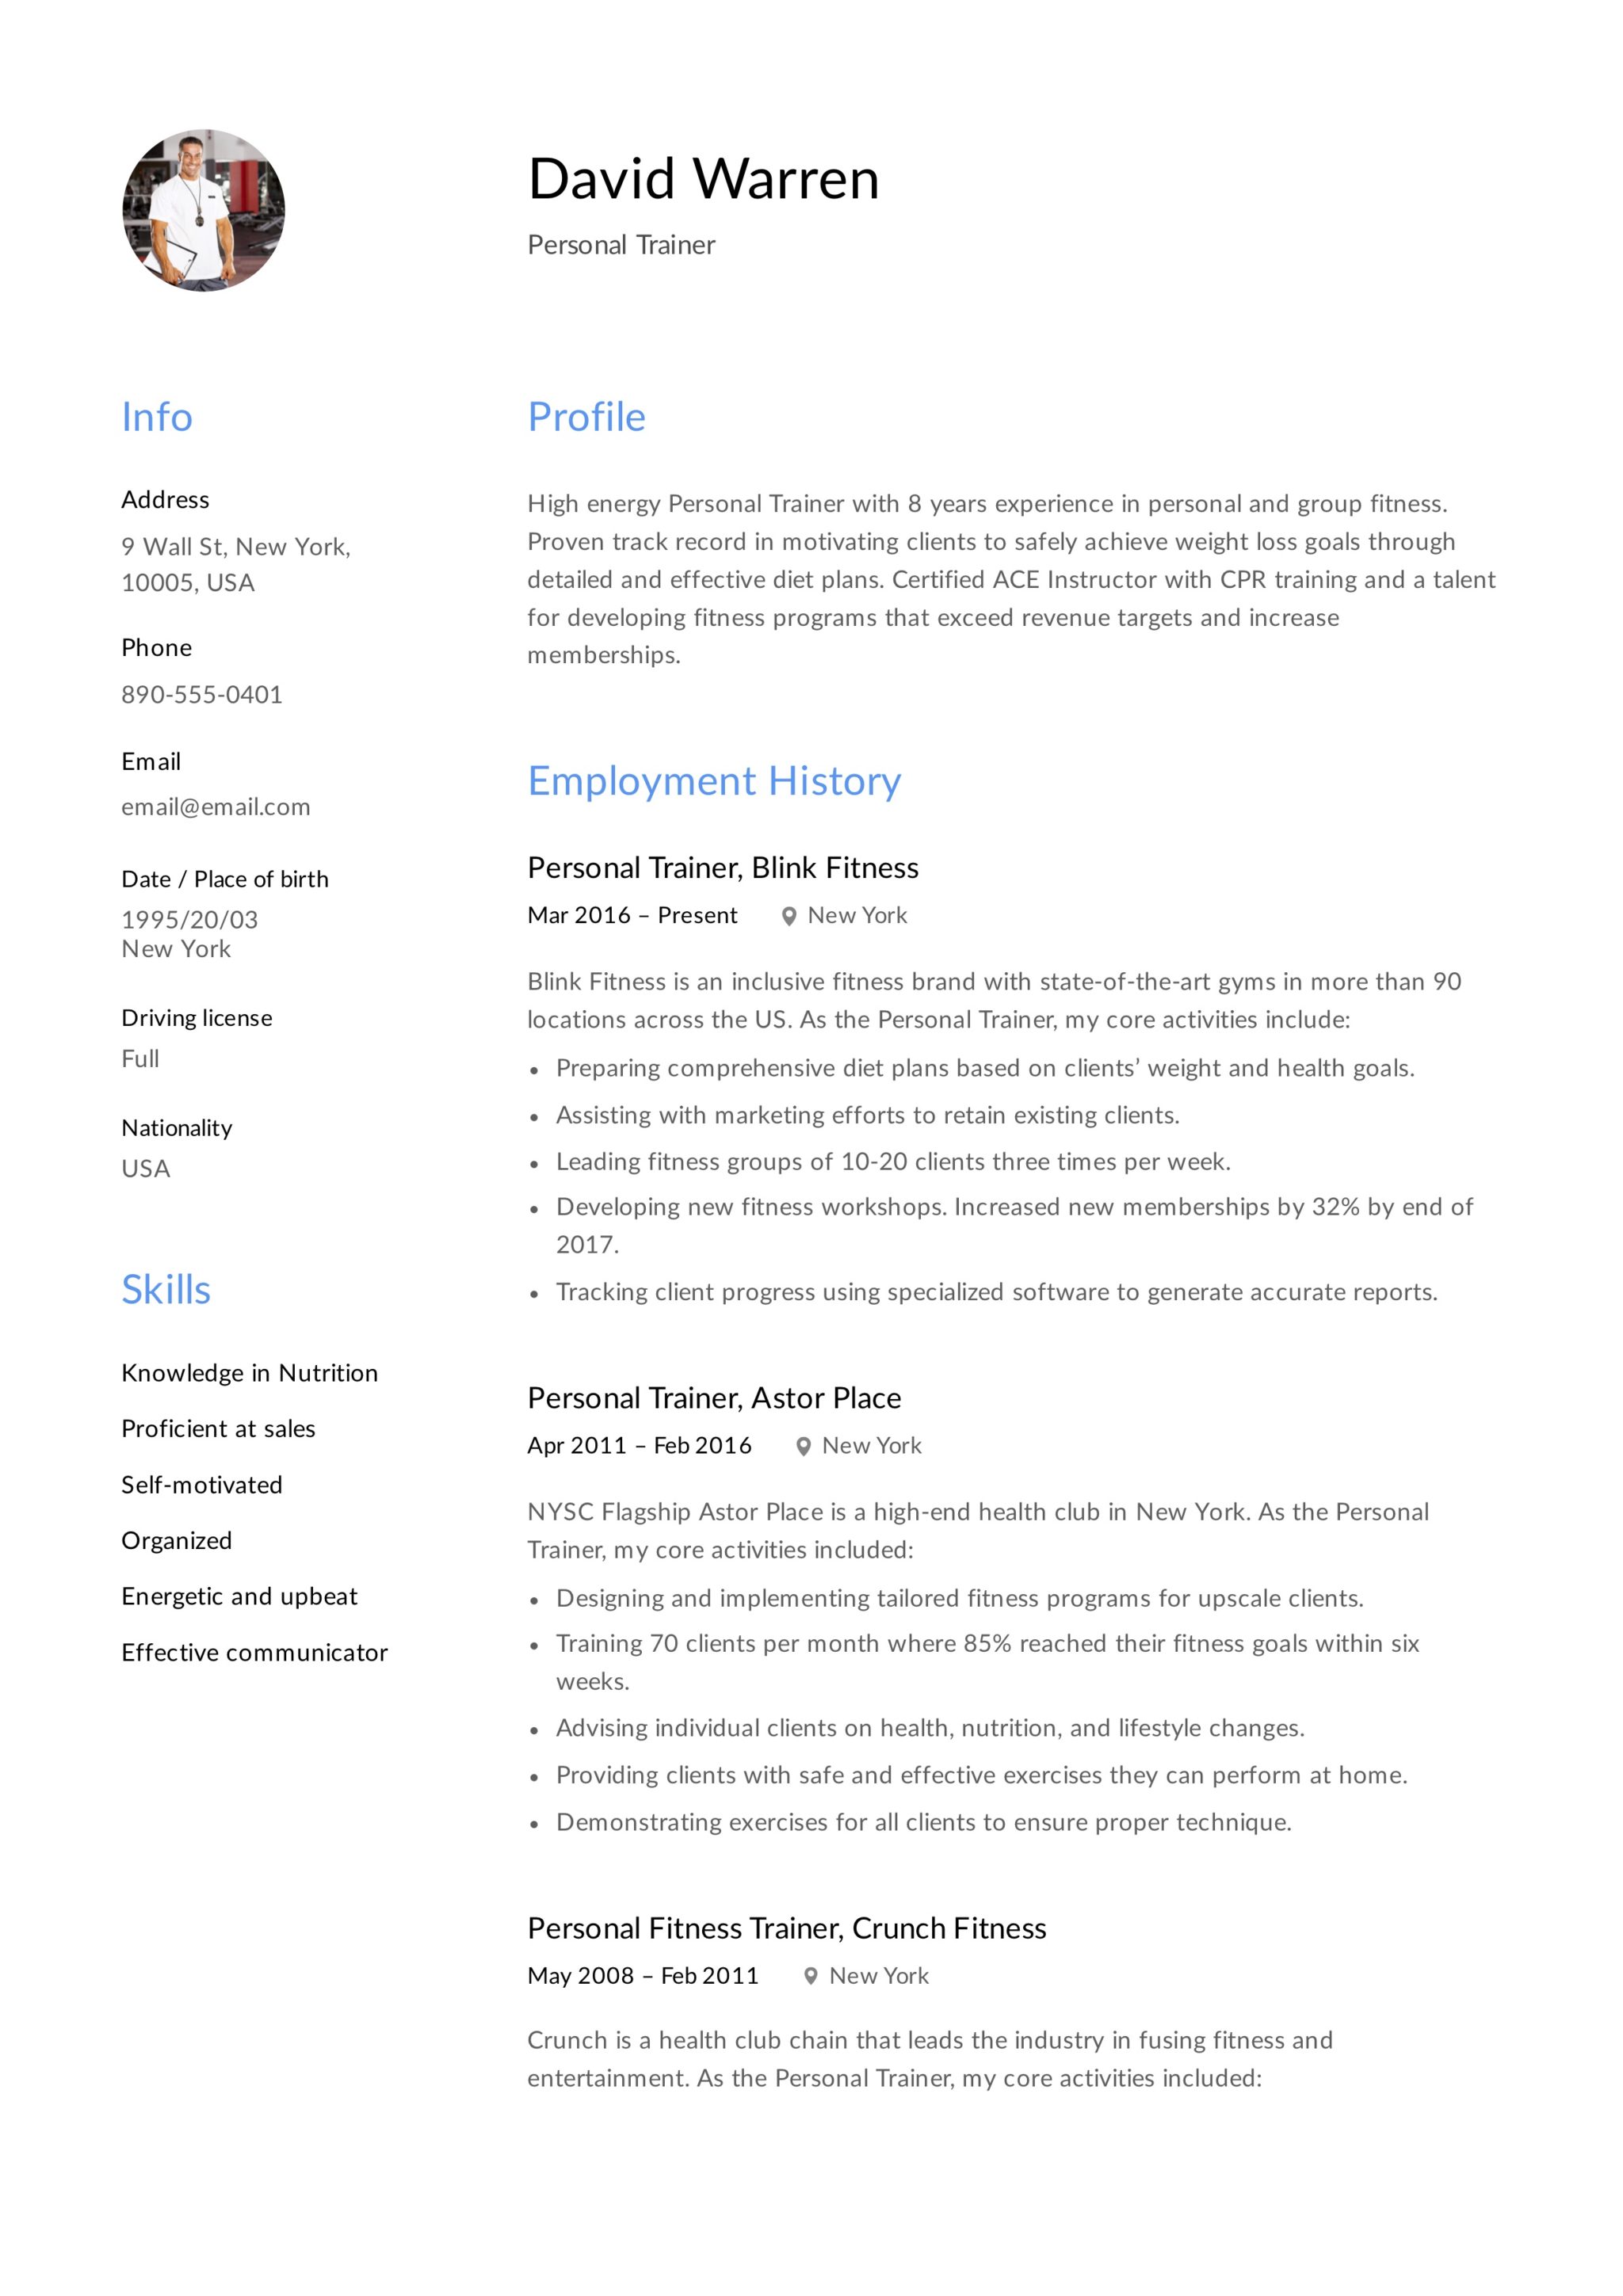 Personal Trainer - Resume Example